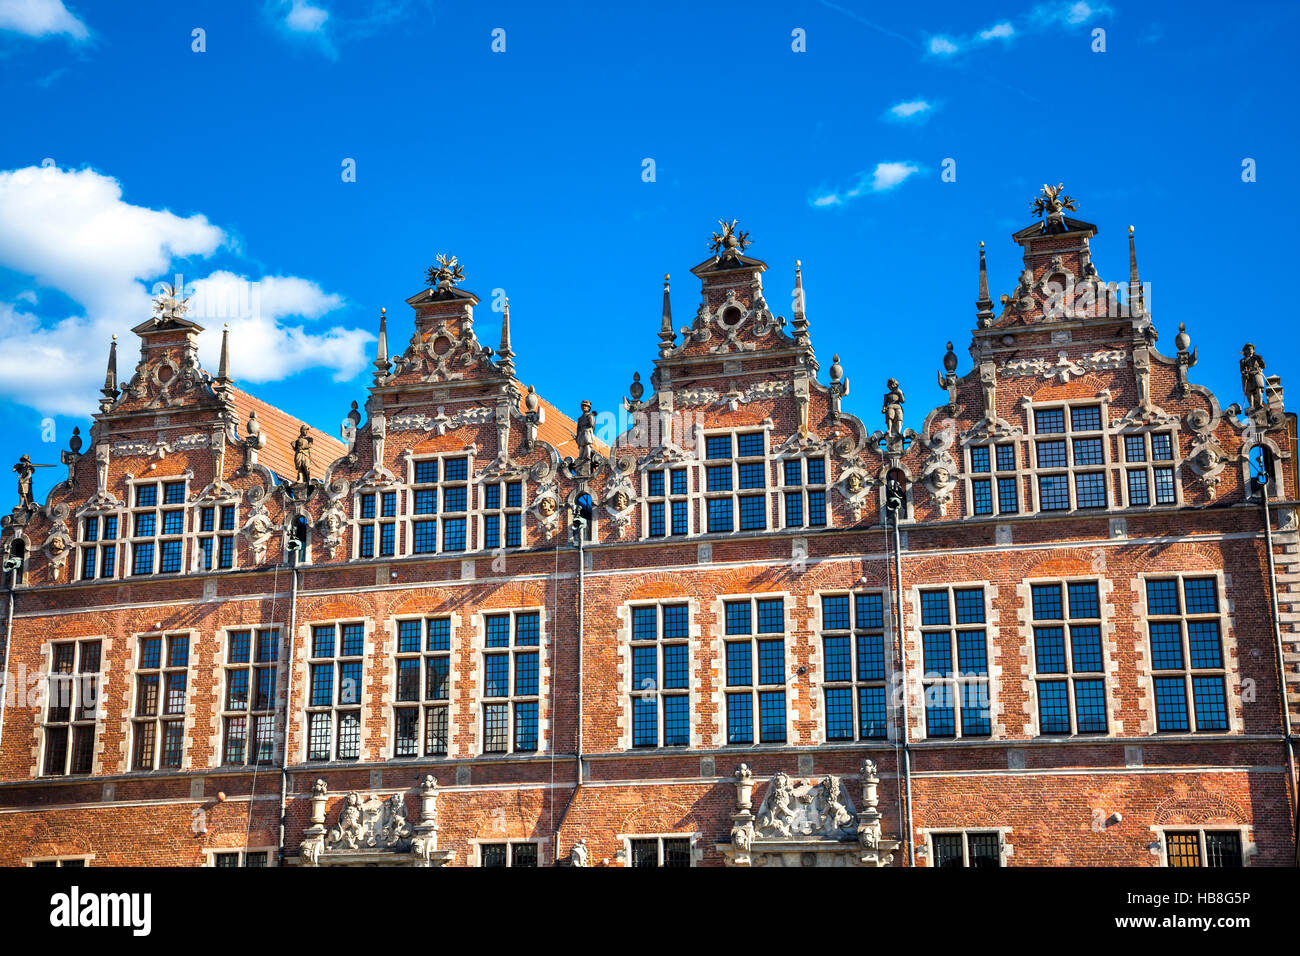 Ornate facades of houses in Gdansk, Poland Stock Photo